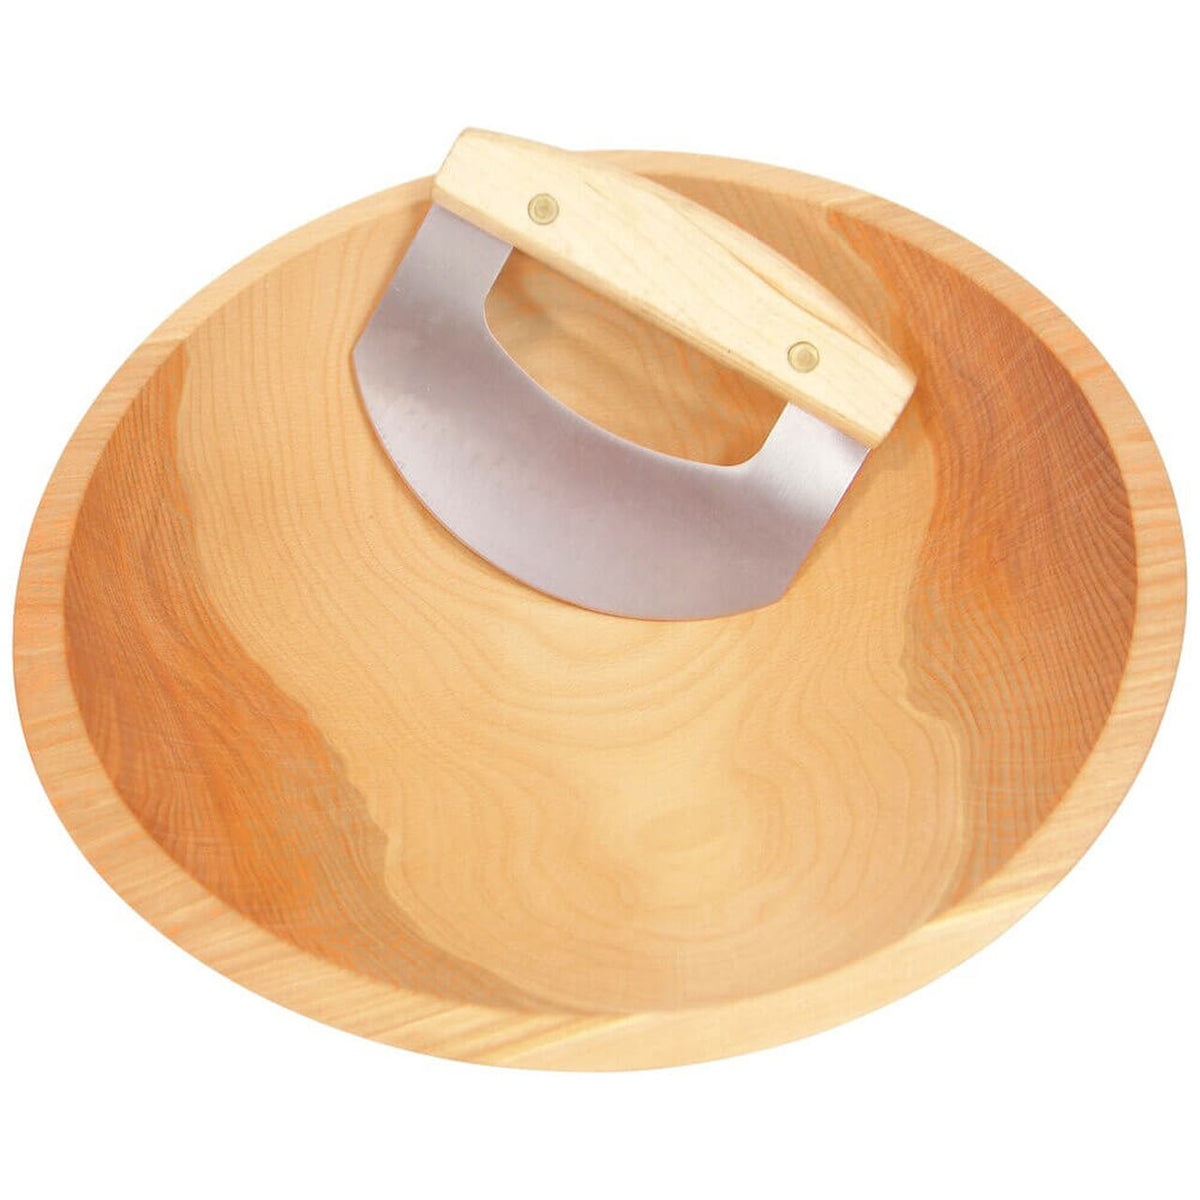 Caesar Salad for One, 9' Wooden Chop Bowl with New Upgraded Chef's Mezzaluna